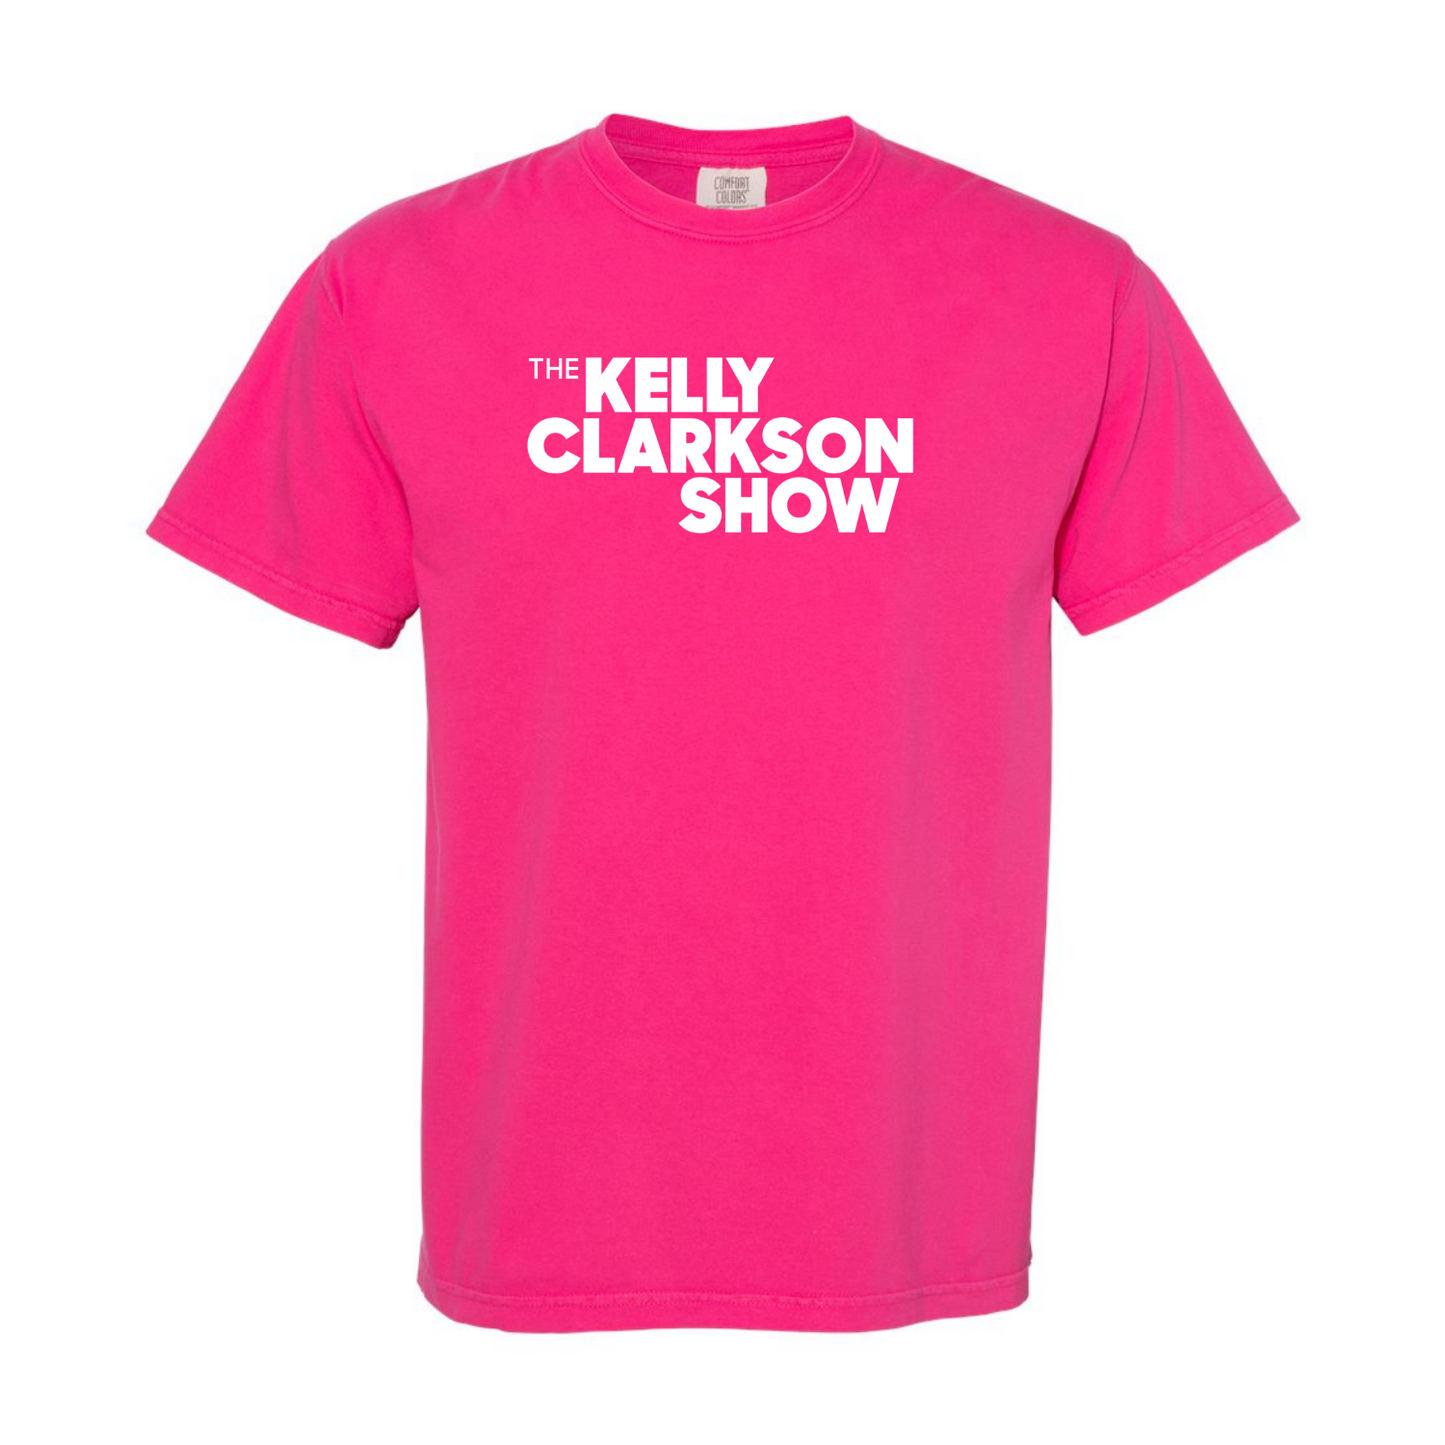 The Kelly Clarkson Show Garment-Dyed T-Shirt - Heliconia